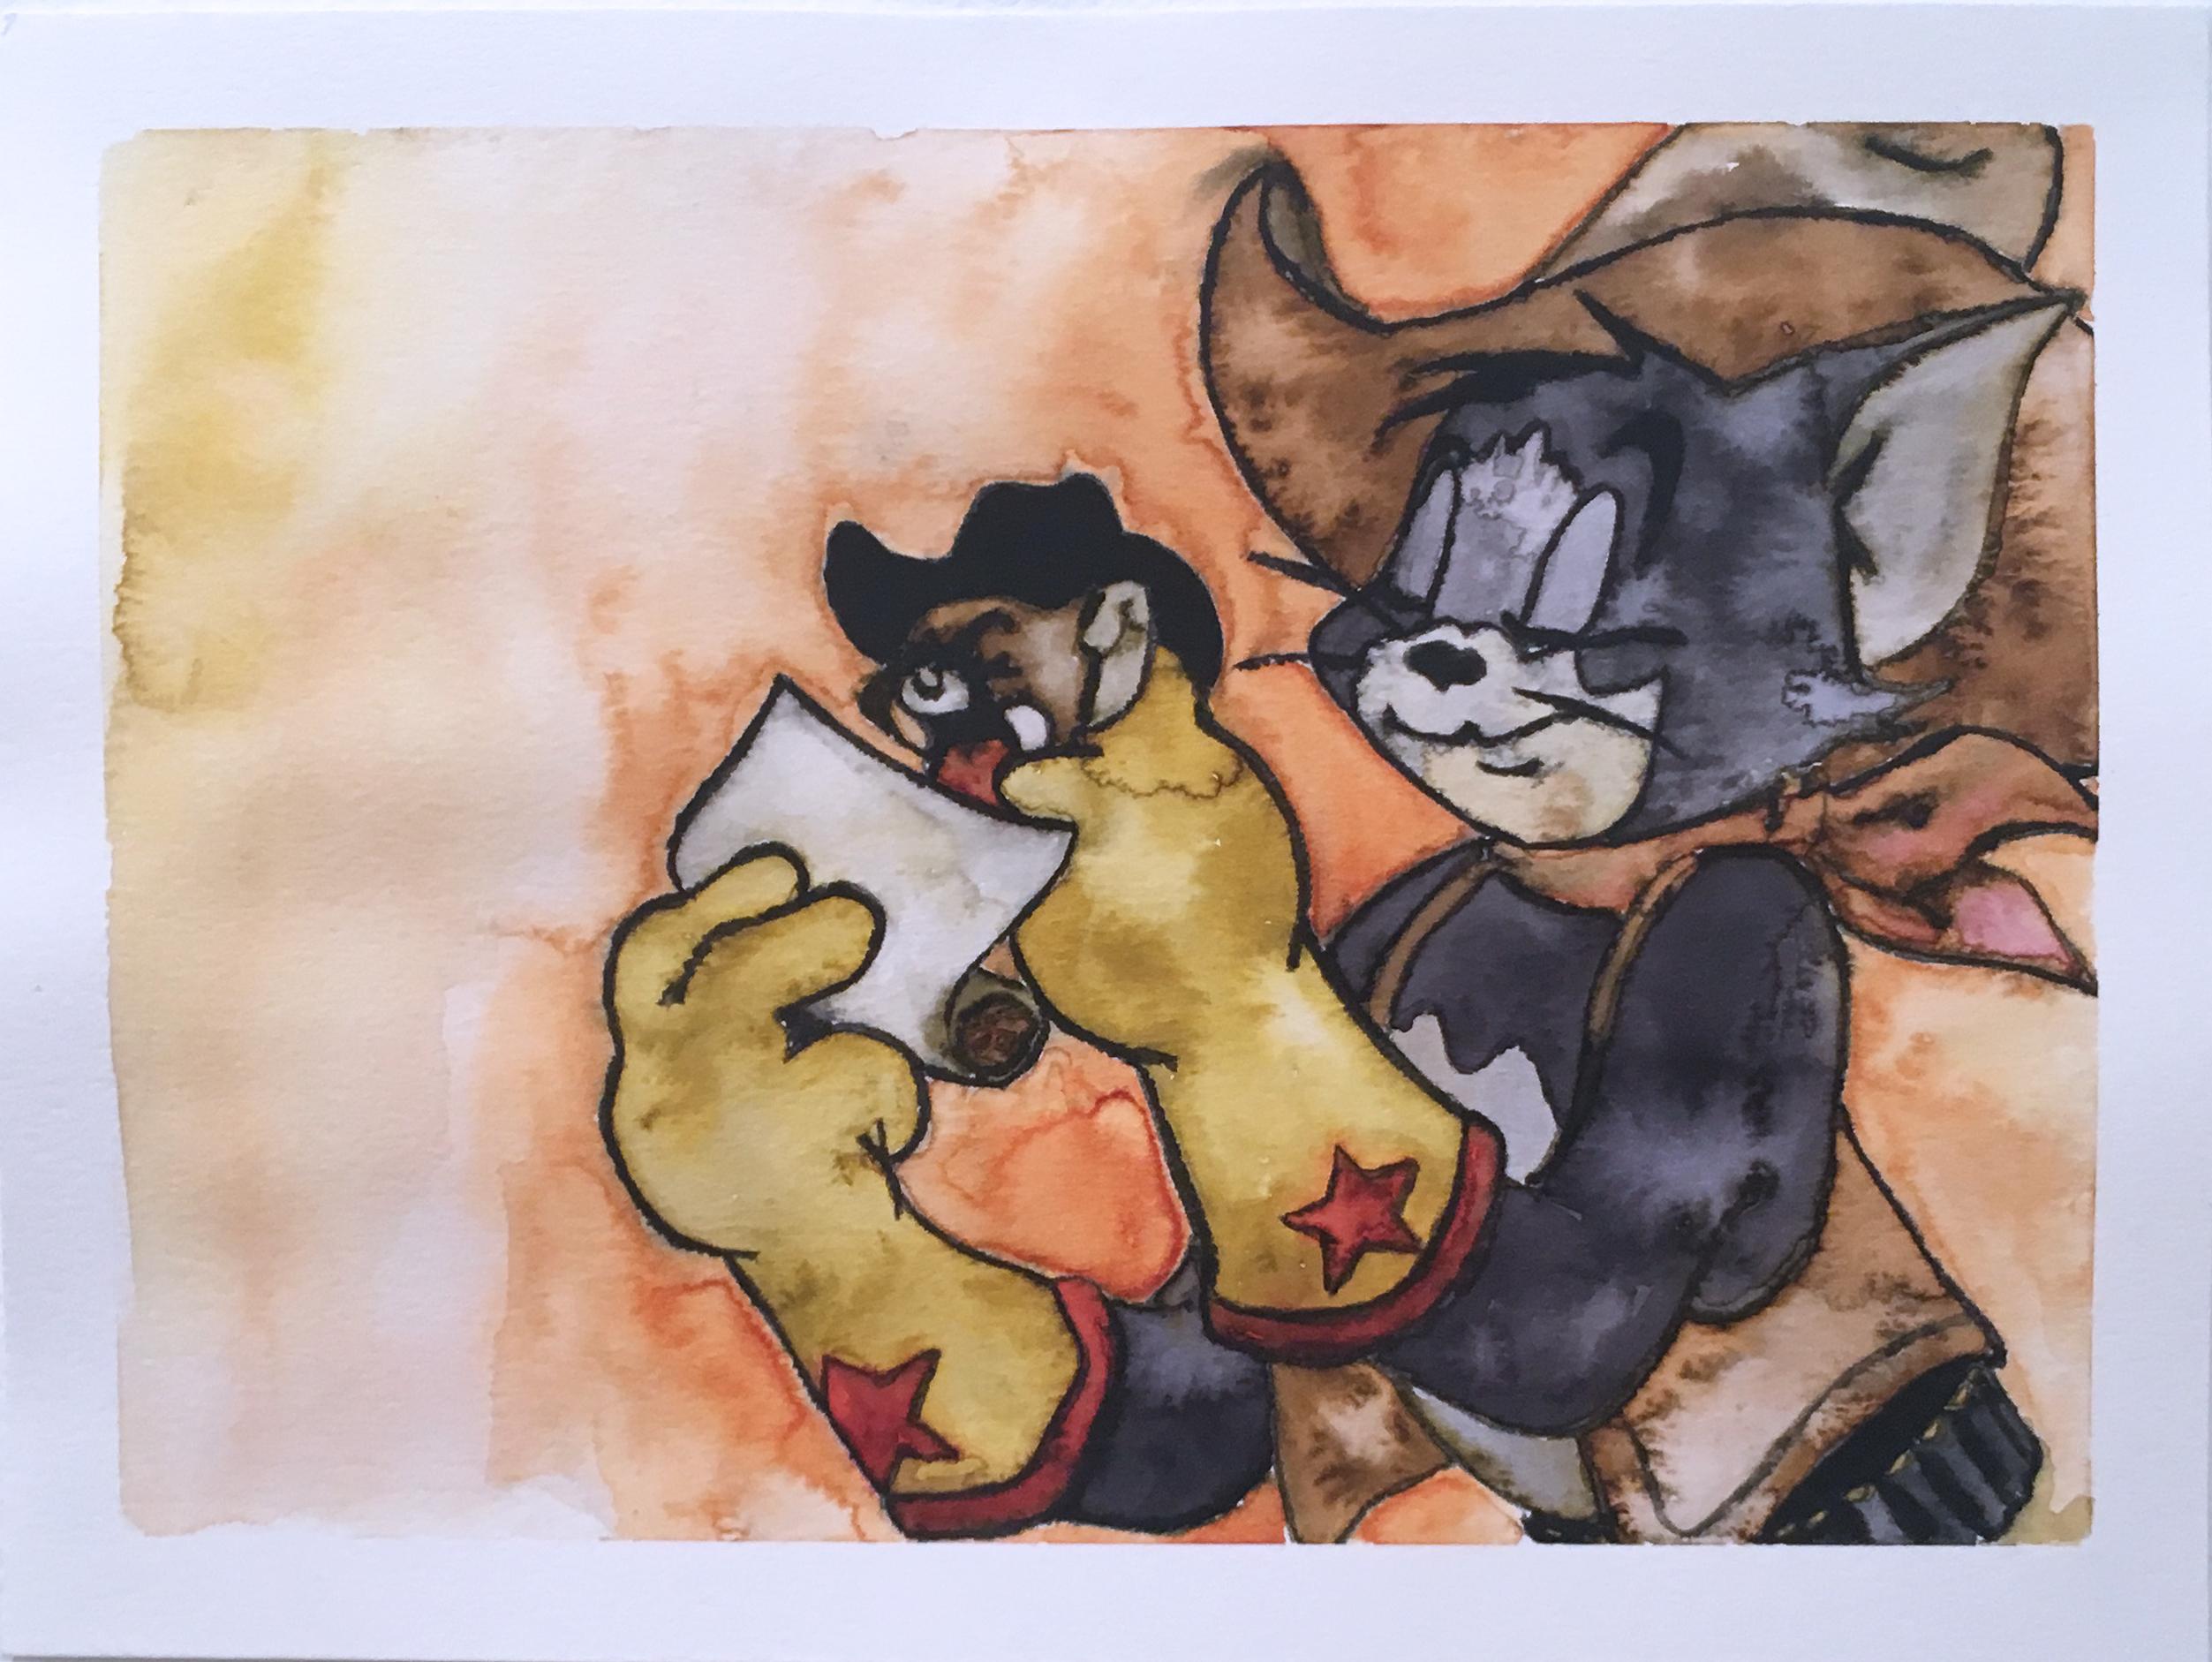 Smoke Break, Limited Edition print of original Tom & Jerry watercolor painting